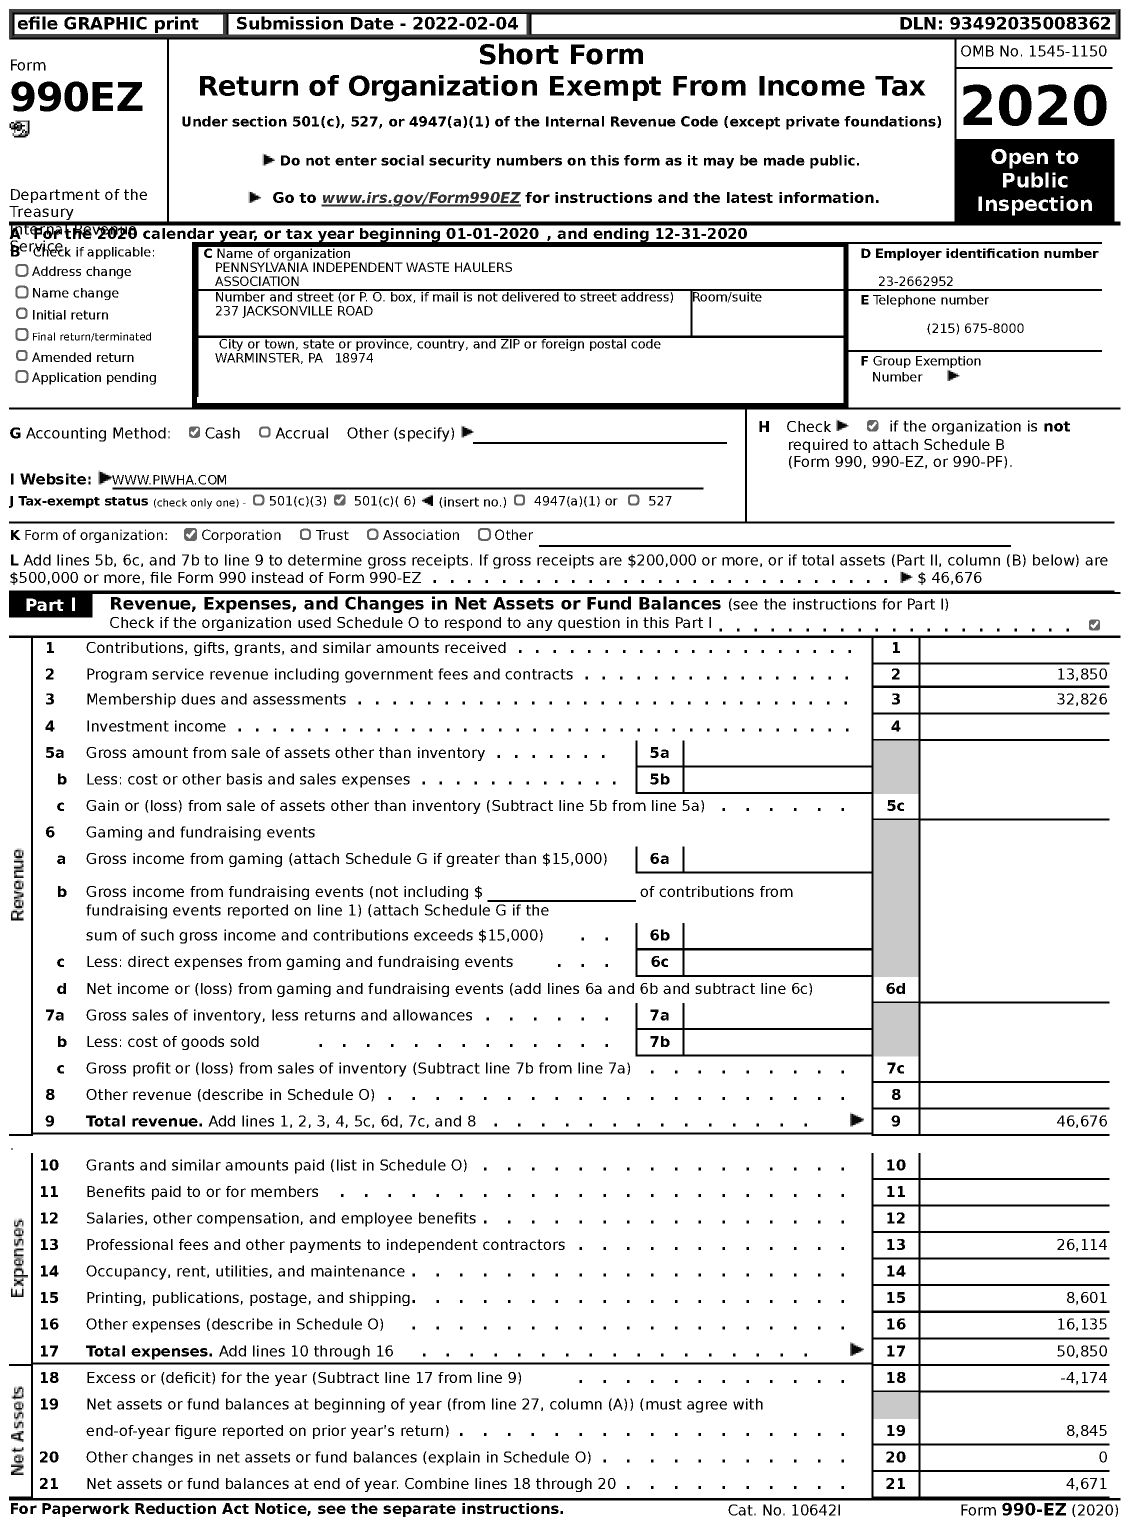 Image of first page of 2020 Form 990EZ for Pennsylvania Independent Waste Haulers Association